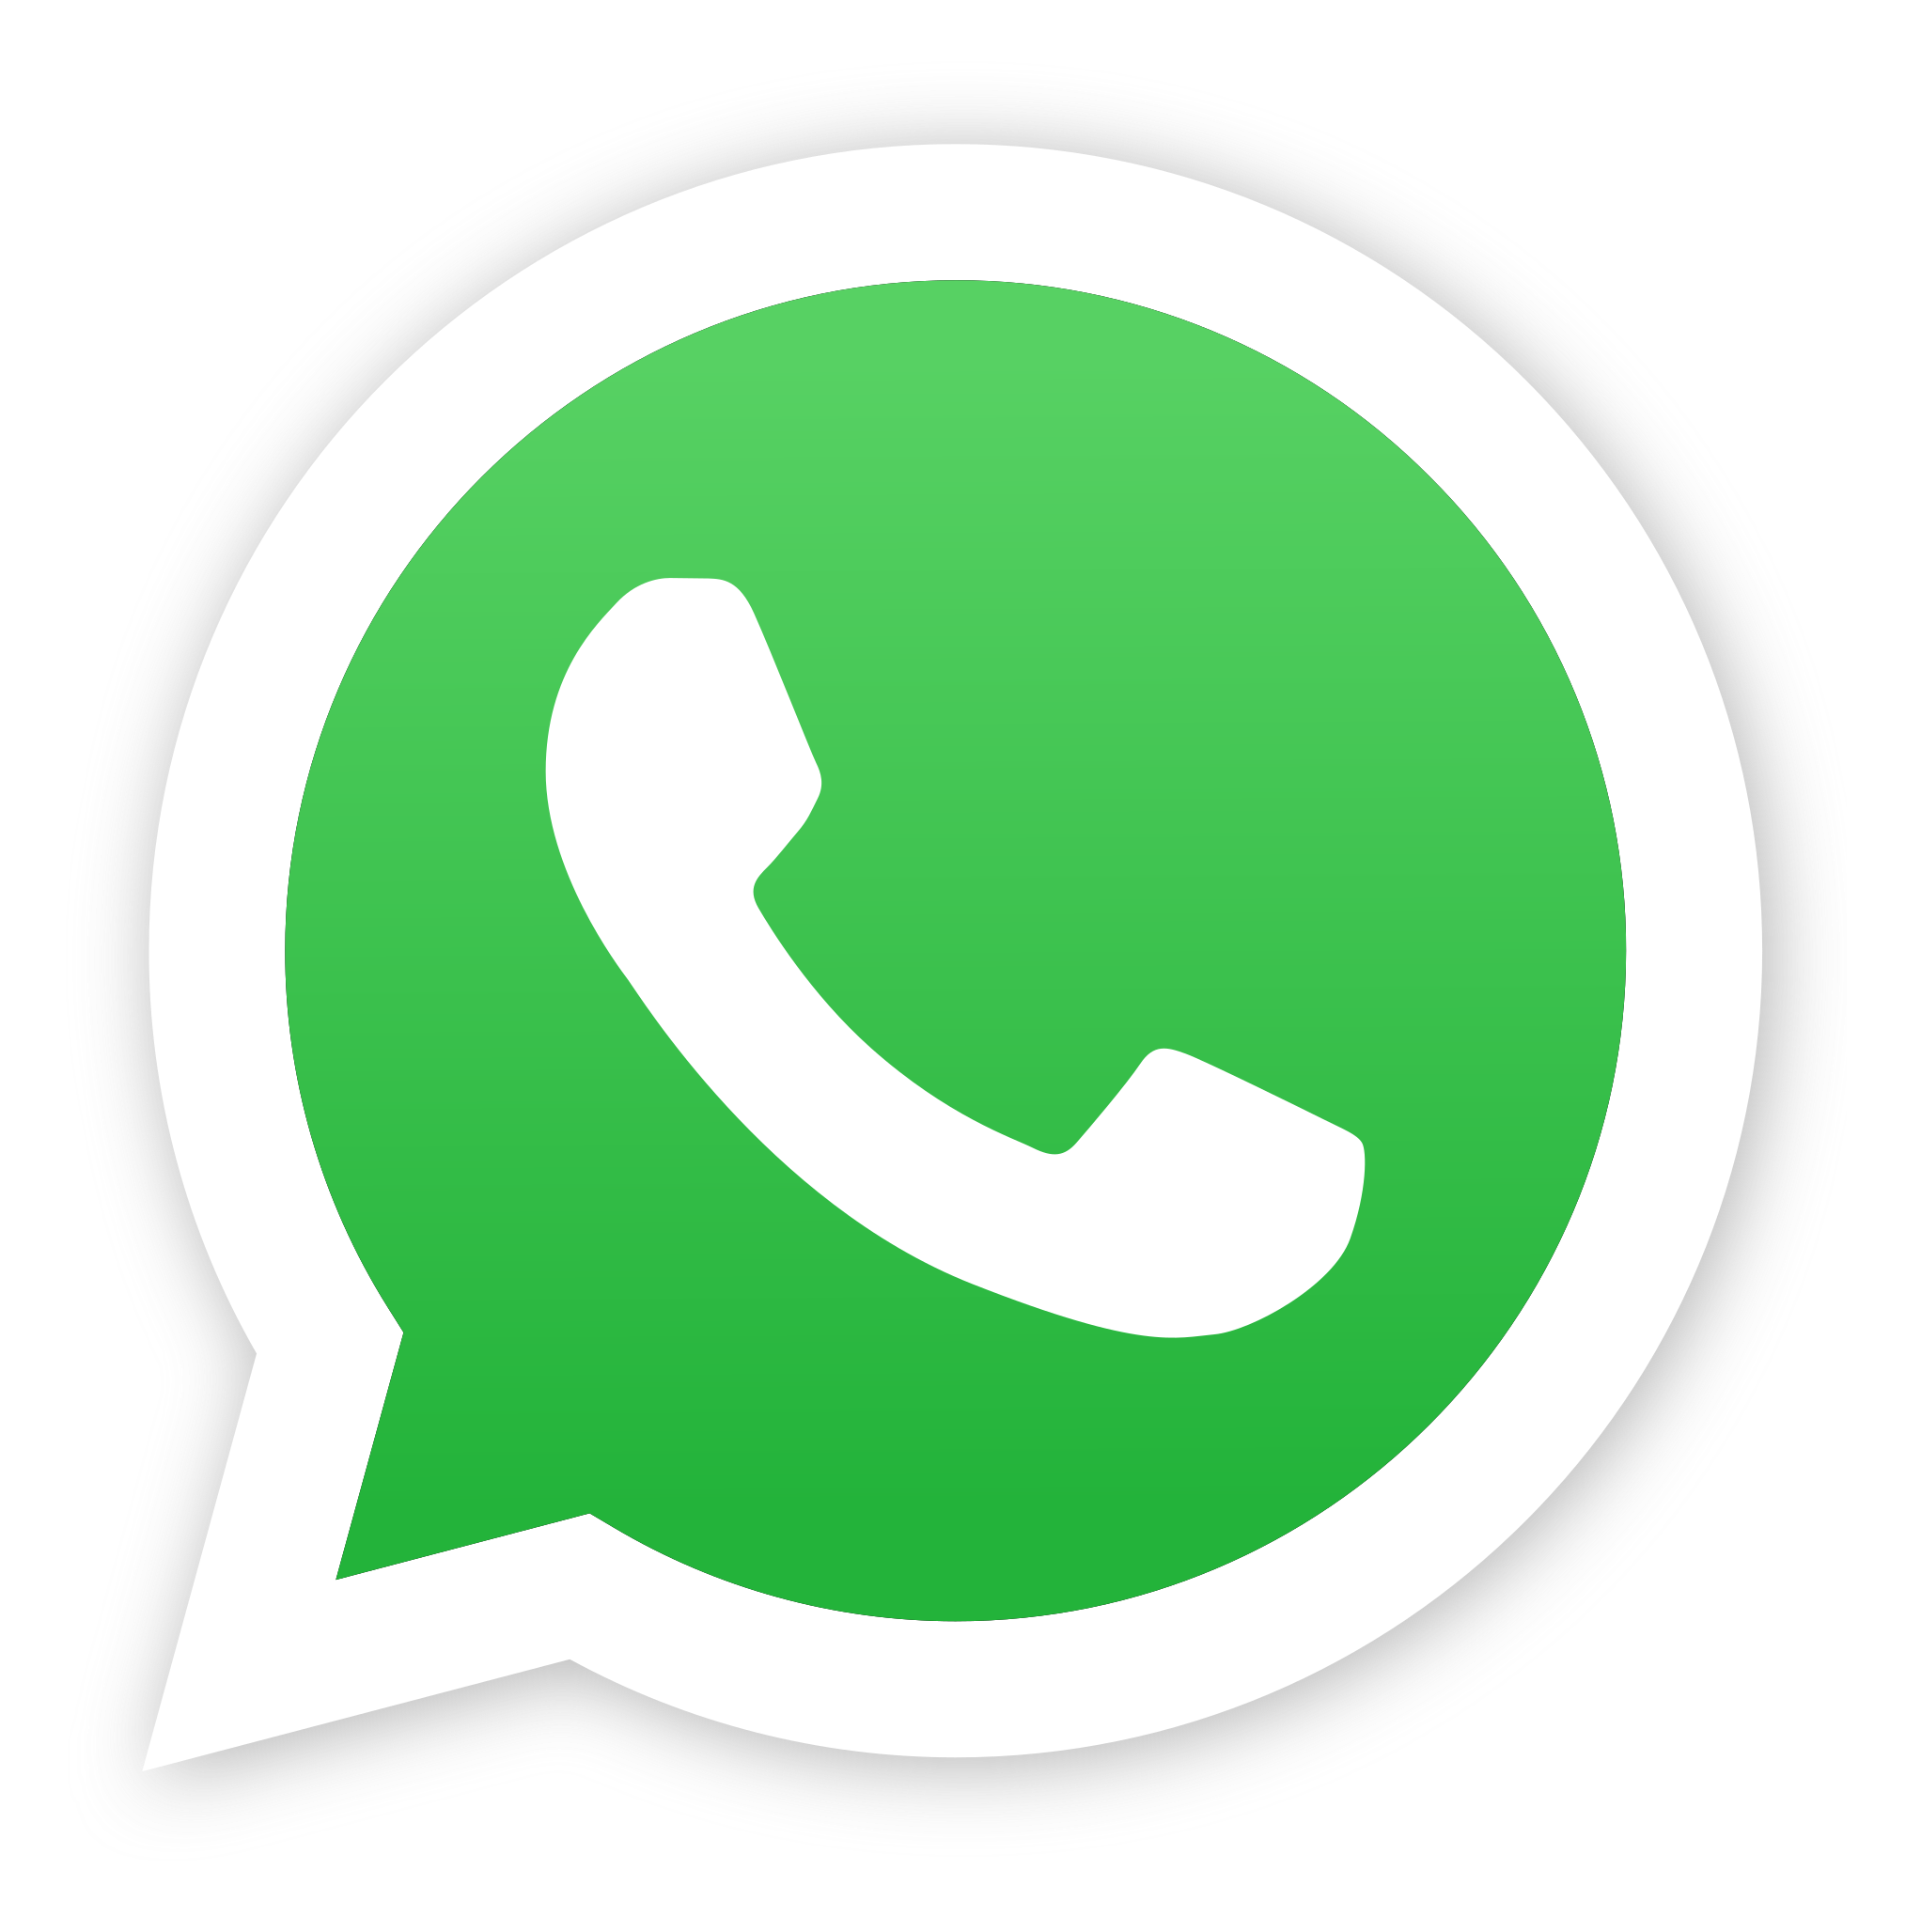 Click to Join us on whats app